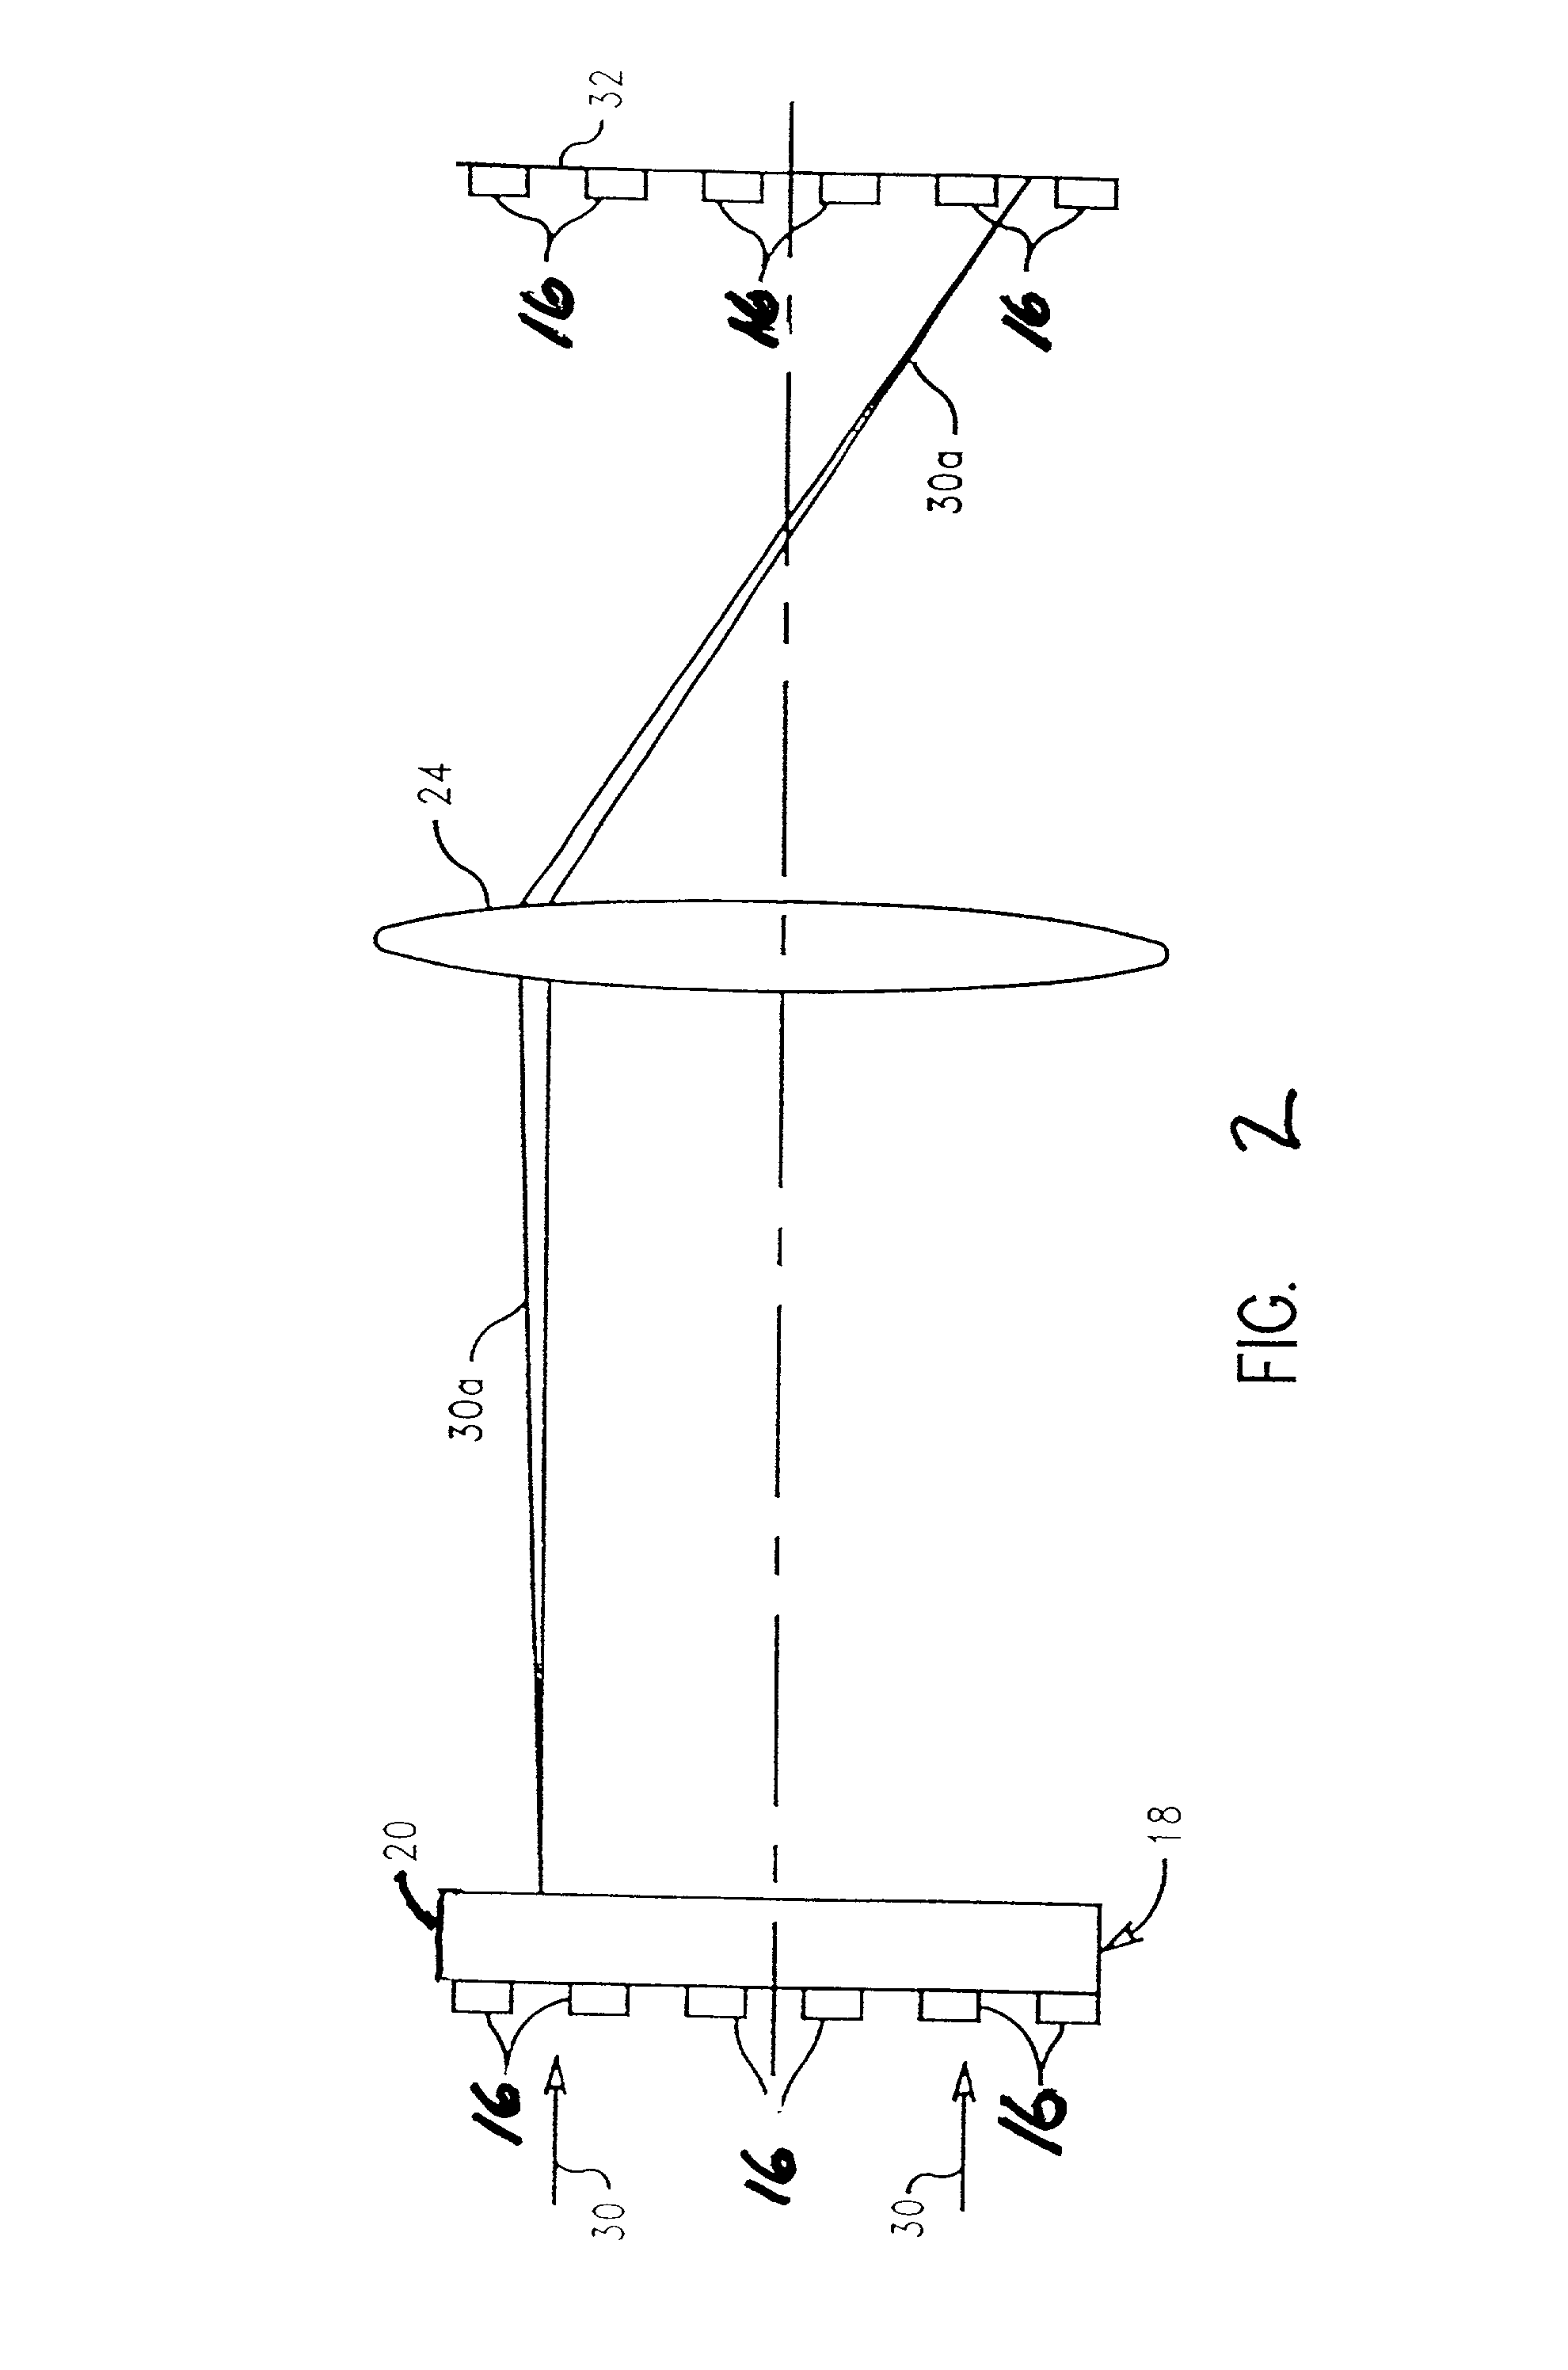 Single tone process window metrology target and method for lithographic processing